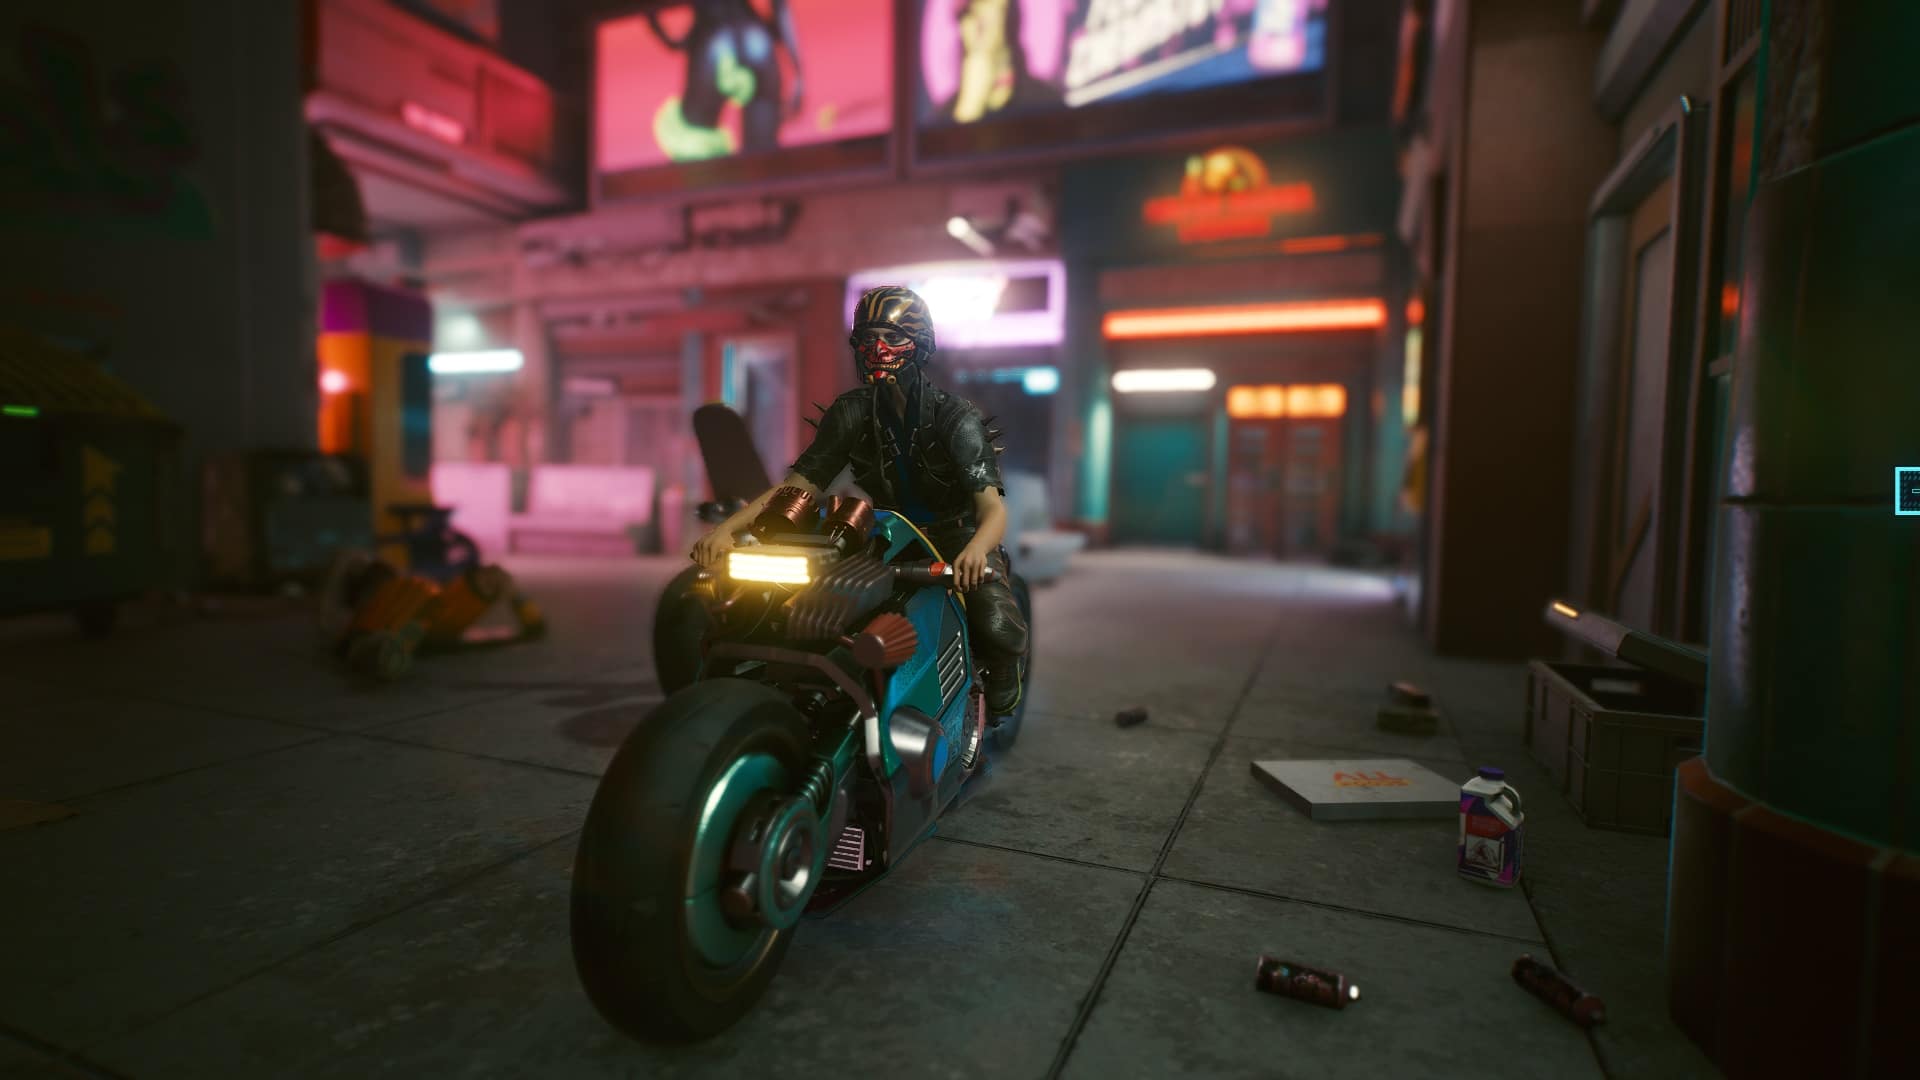 Motorcycles are a good fit for melee gameplay, if only because you can race down narrow alleys into the middle of entrenched gangs.